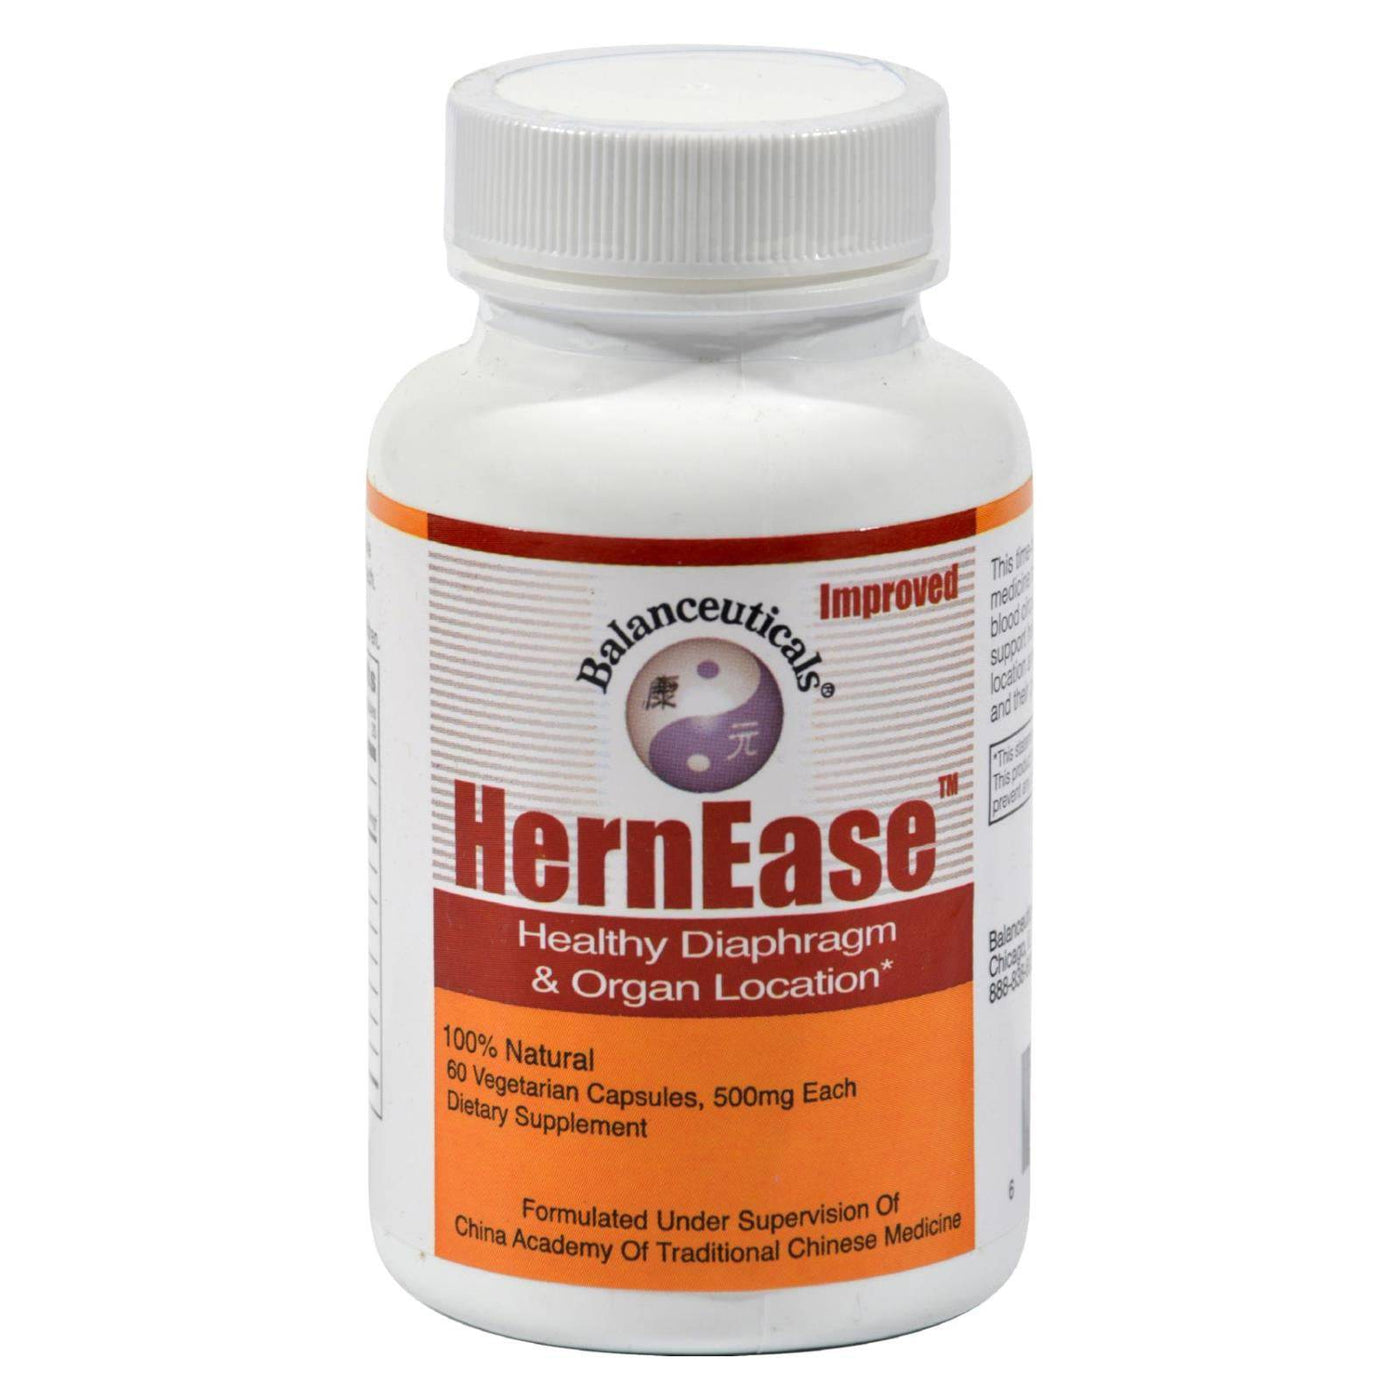 Balanceuticals Hernease - 60 Capsules | OnlyNaturals.us